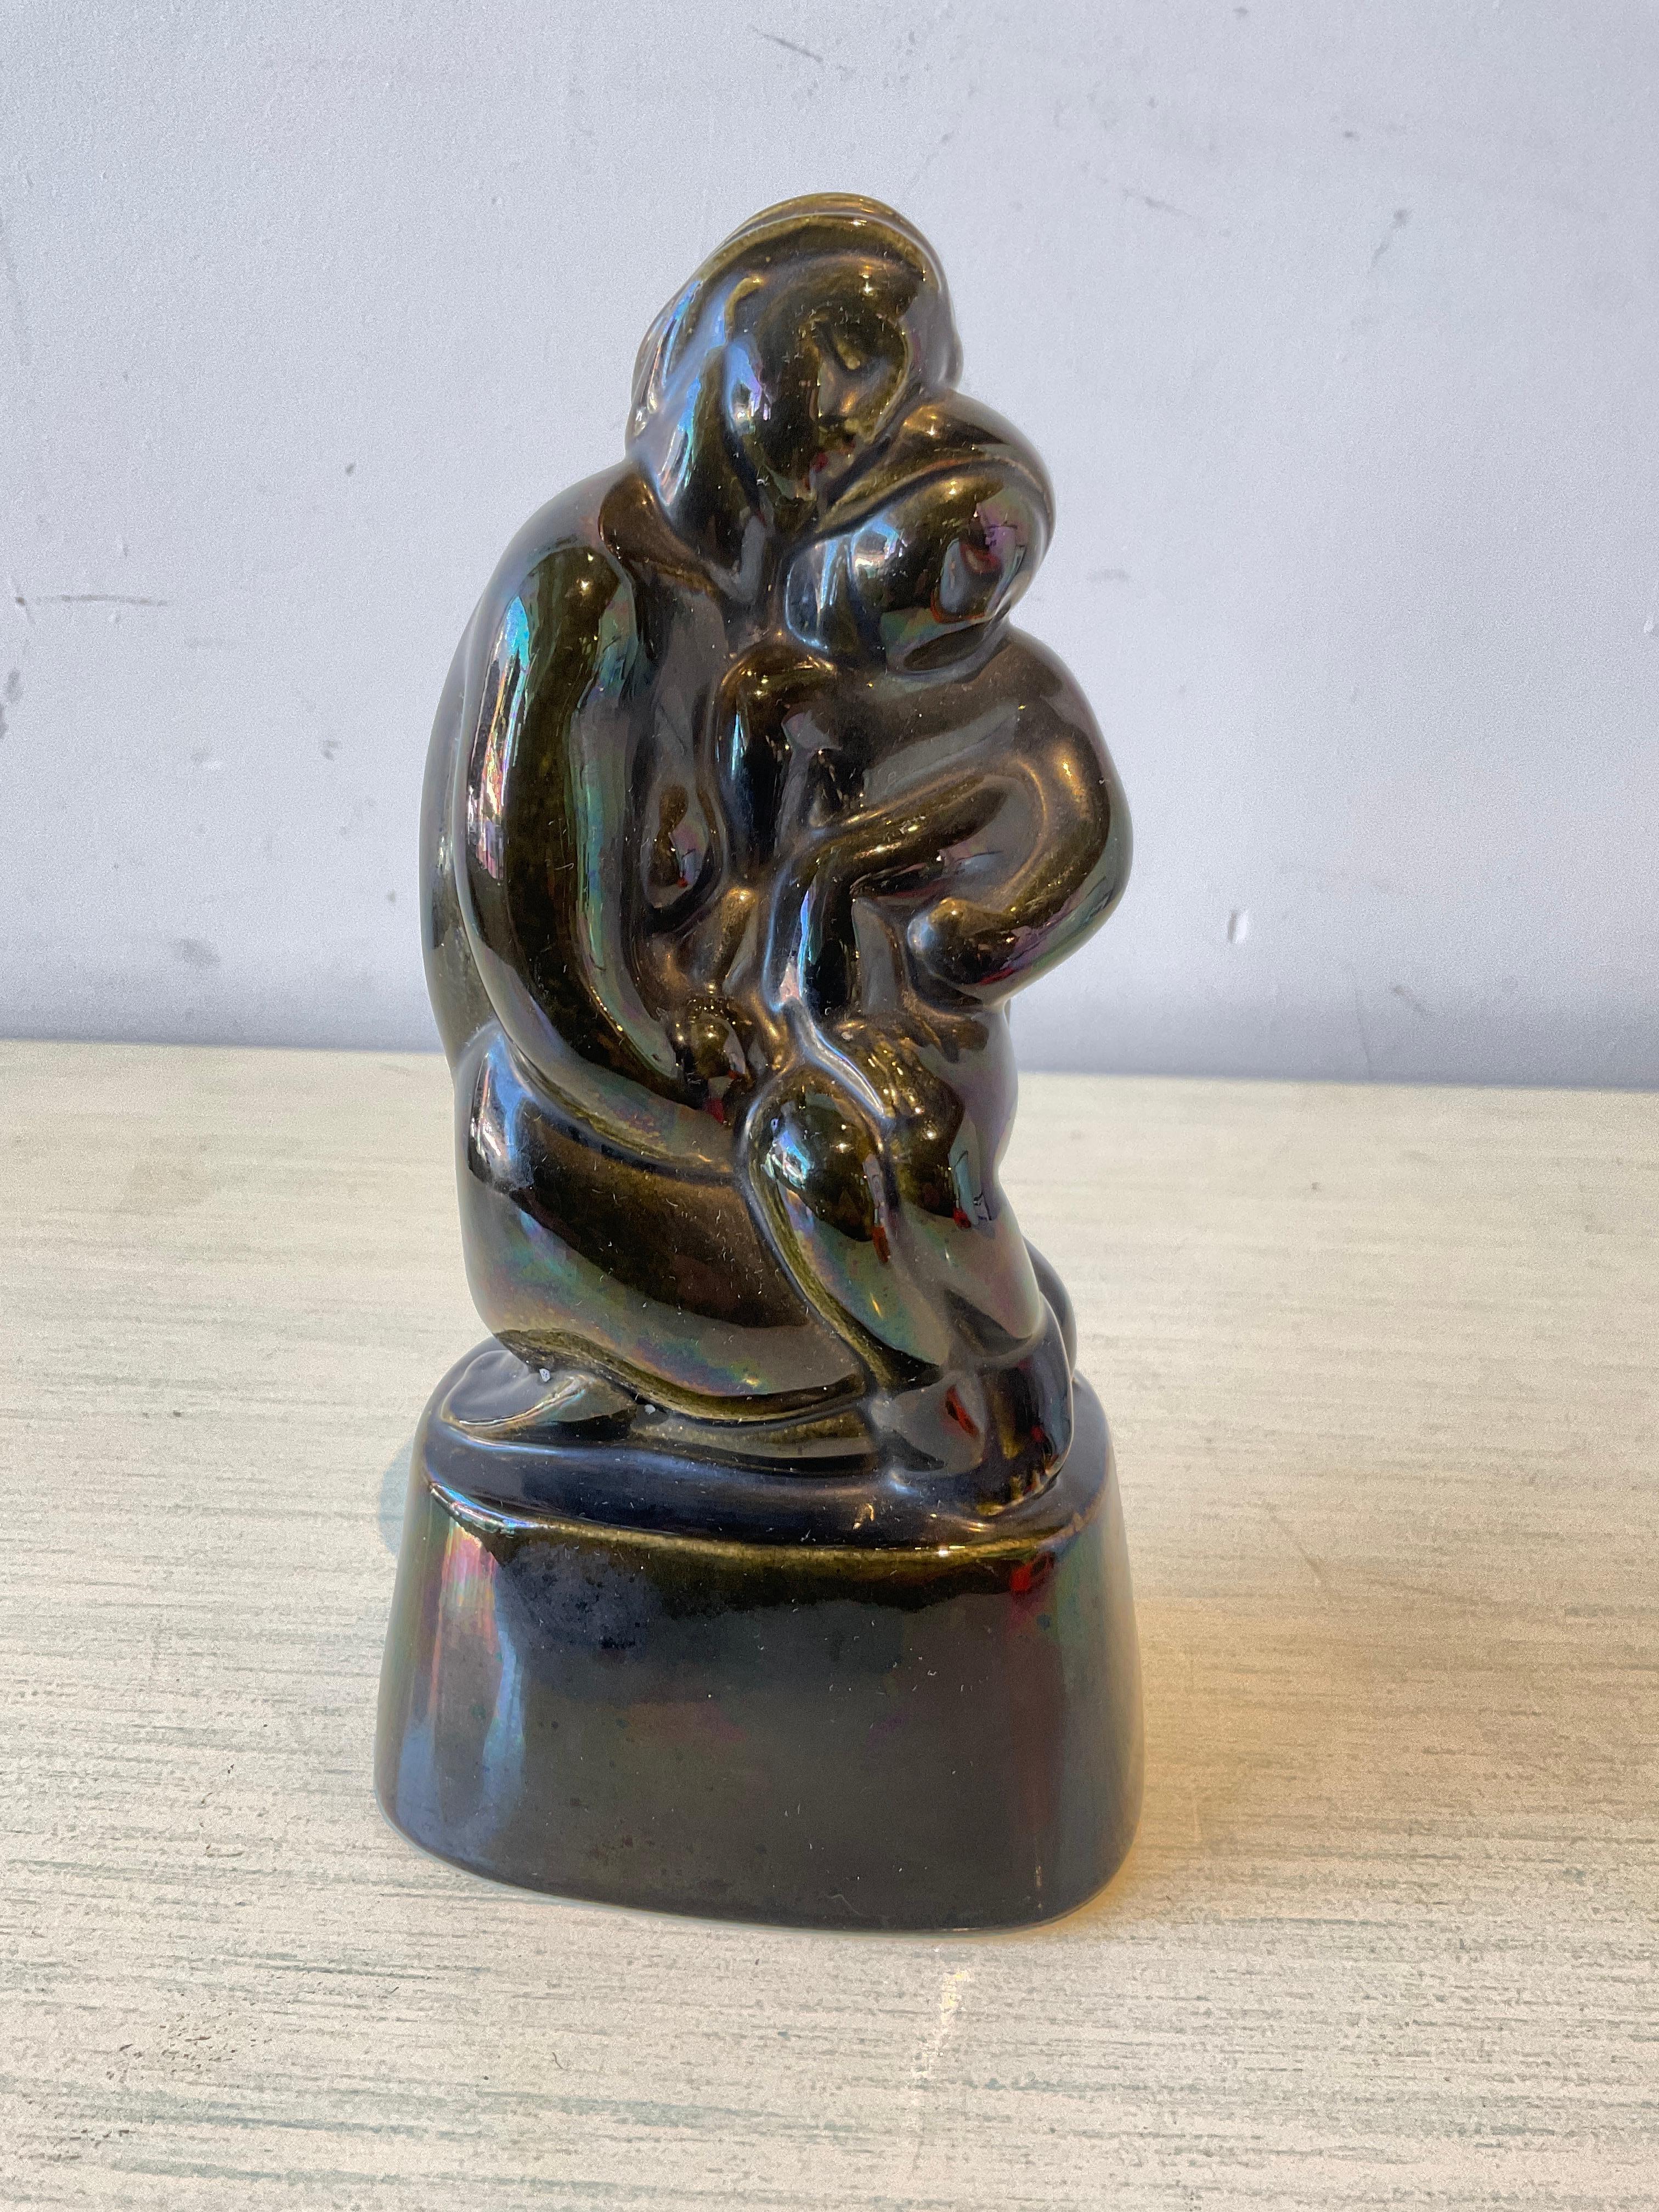 1929 Arko sculpture by N. Berger entitled Maternity. Flake of ceramic gone as shown in image 8.
Arko 